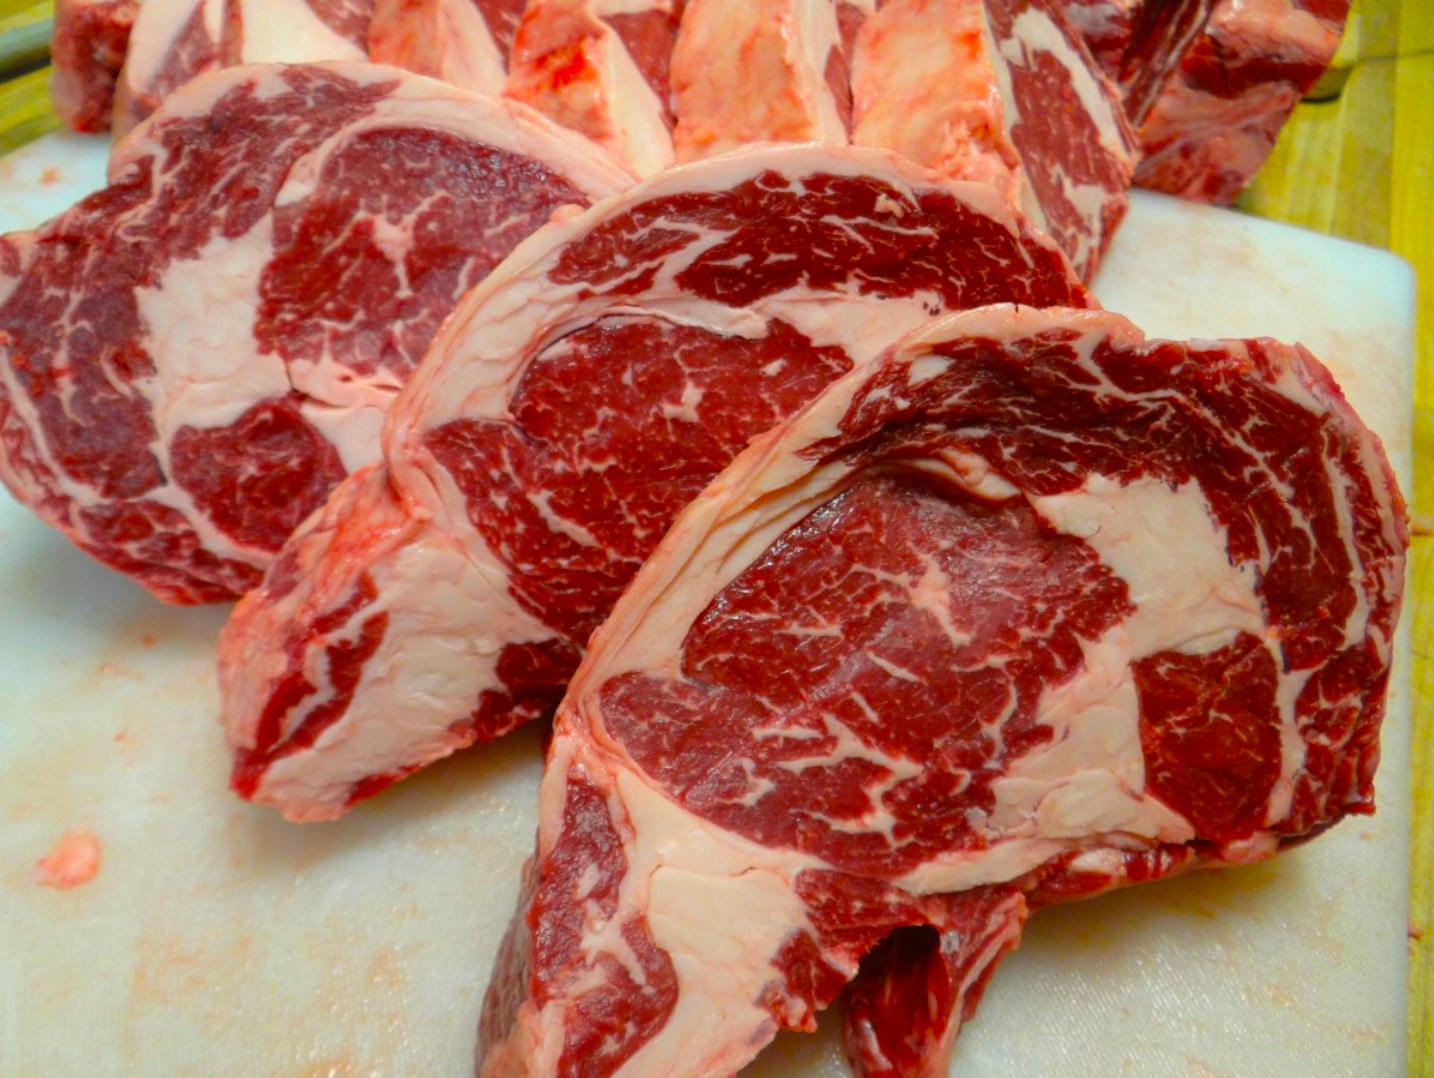 CFIA Cracks Down on Meat Cut Mislabelling, But Ignores Animal Suffering